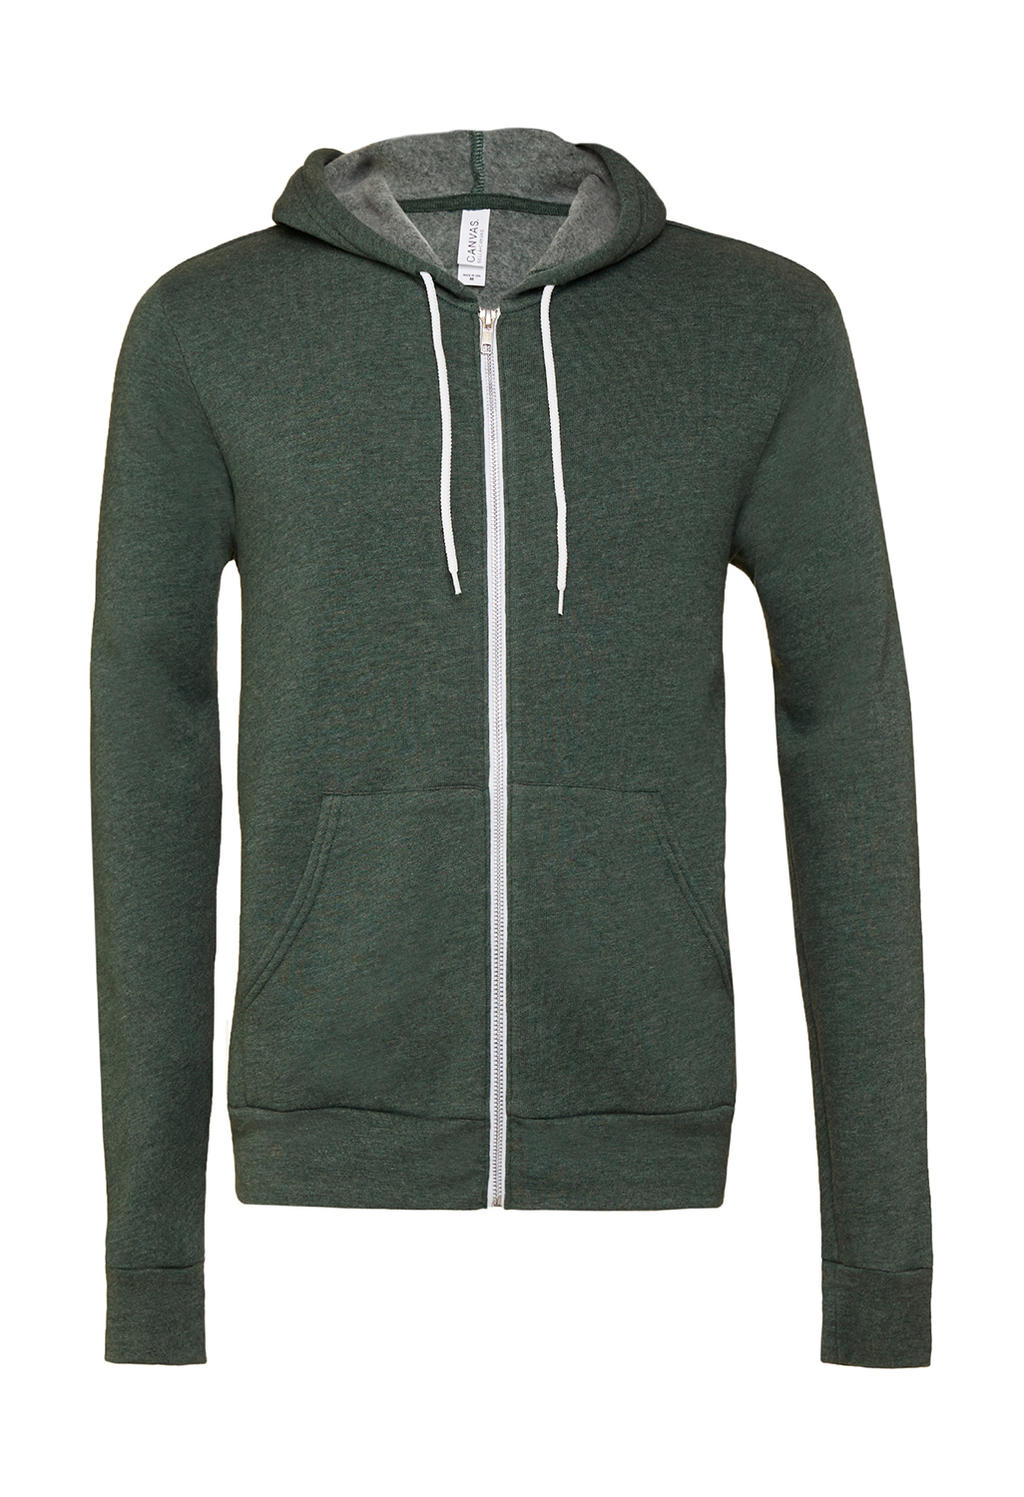  Unisex Poly-Cotton Full Zip Hoodie in Farbe Heather Forest